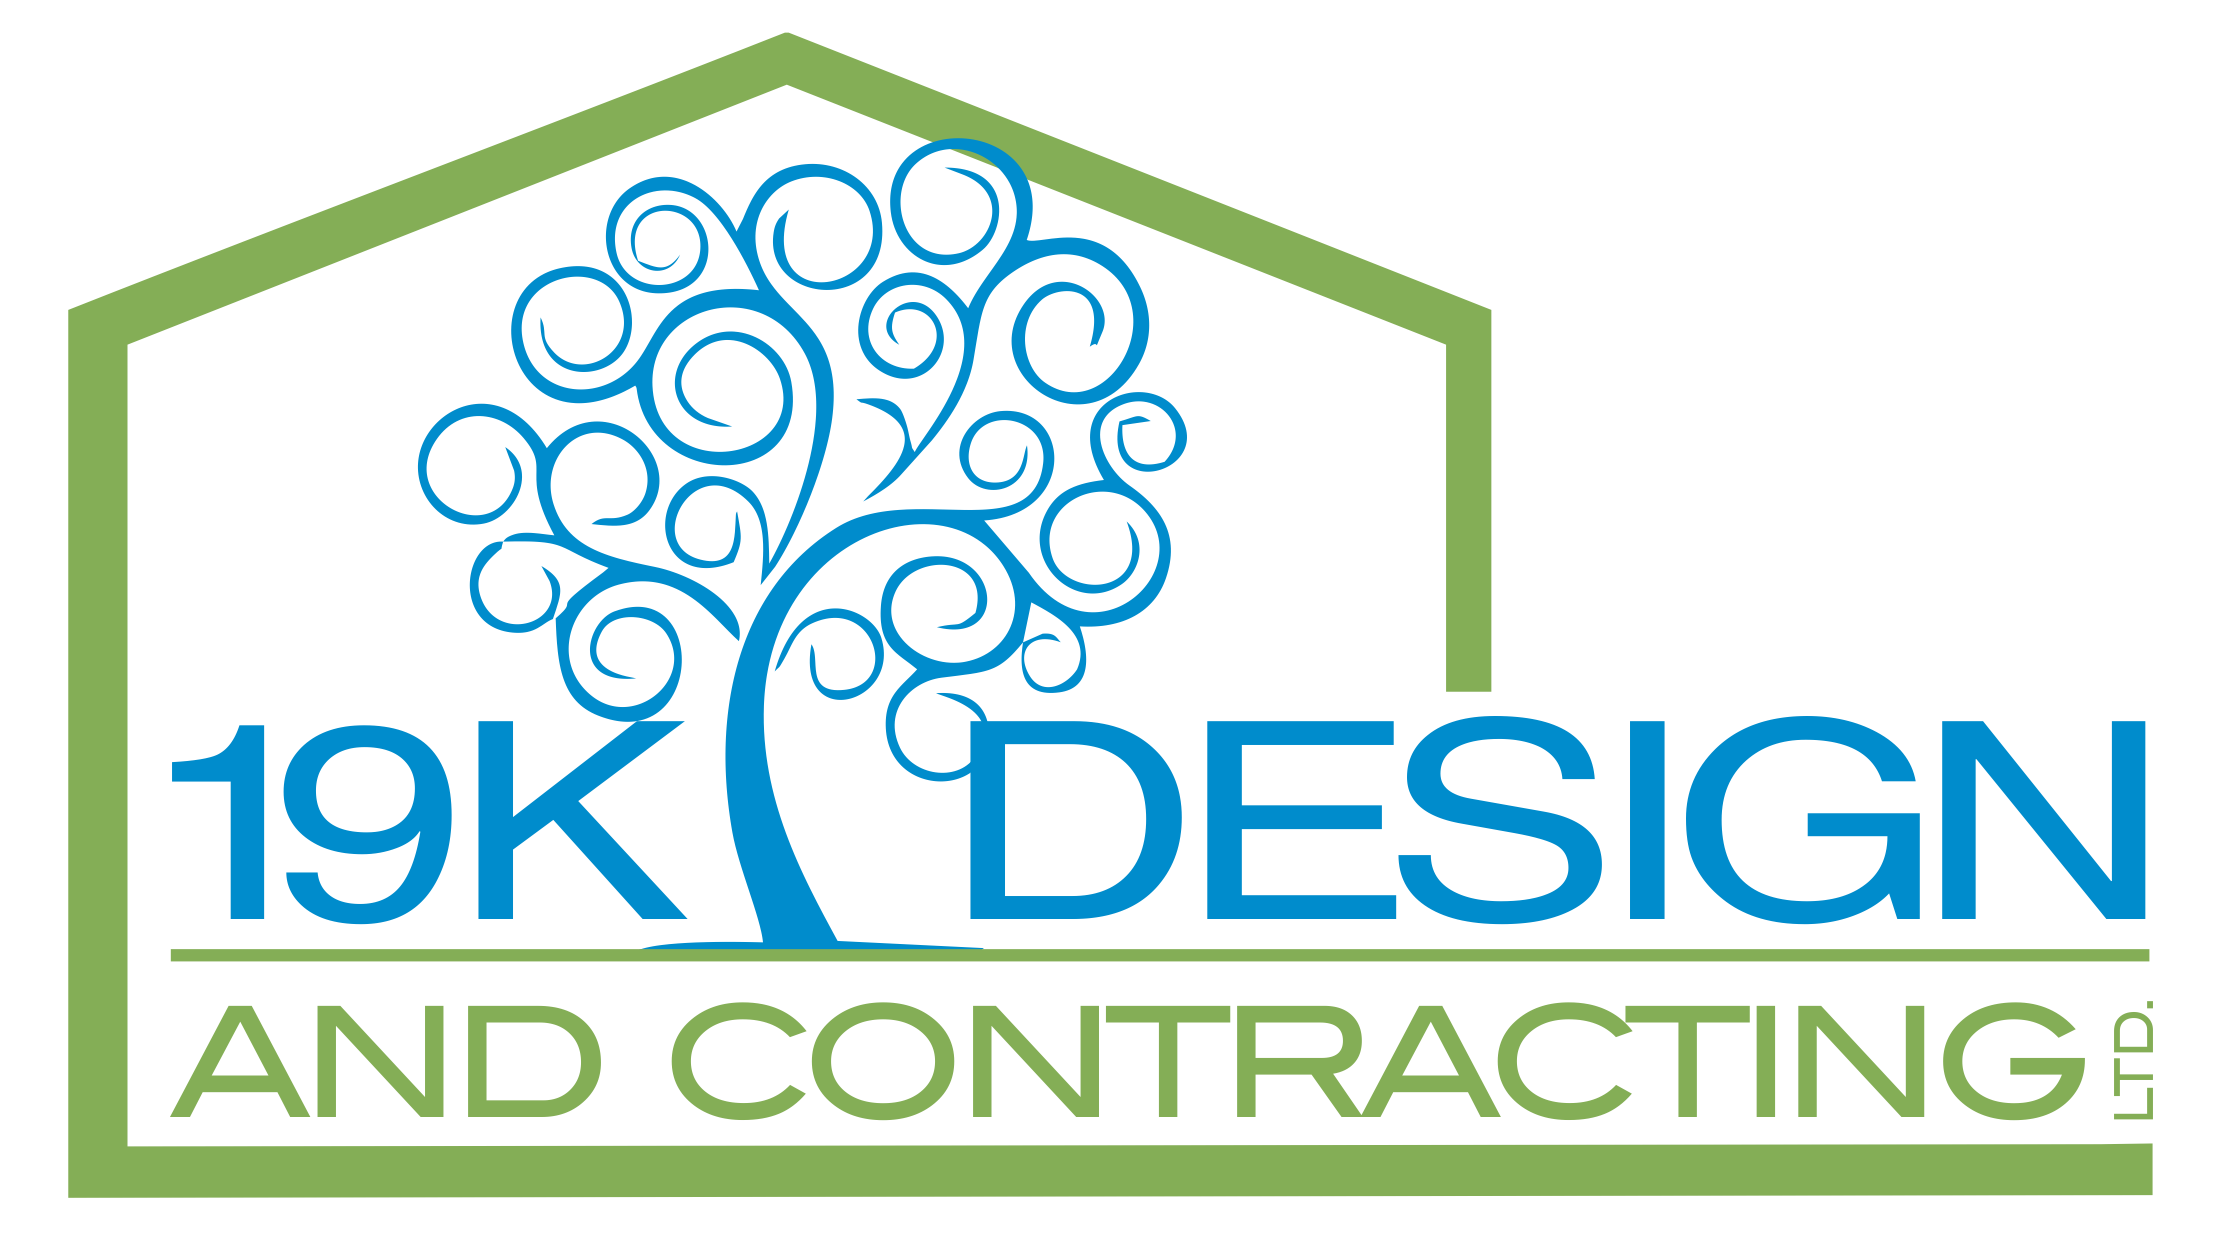 19K Design and Contracting Ltd. Logo